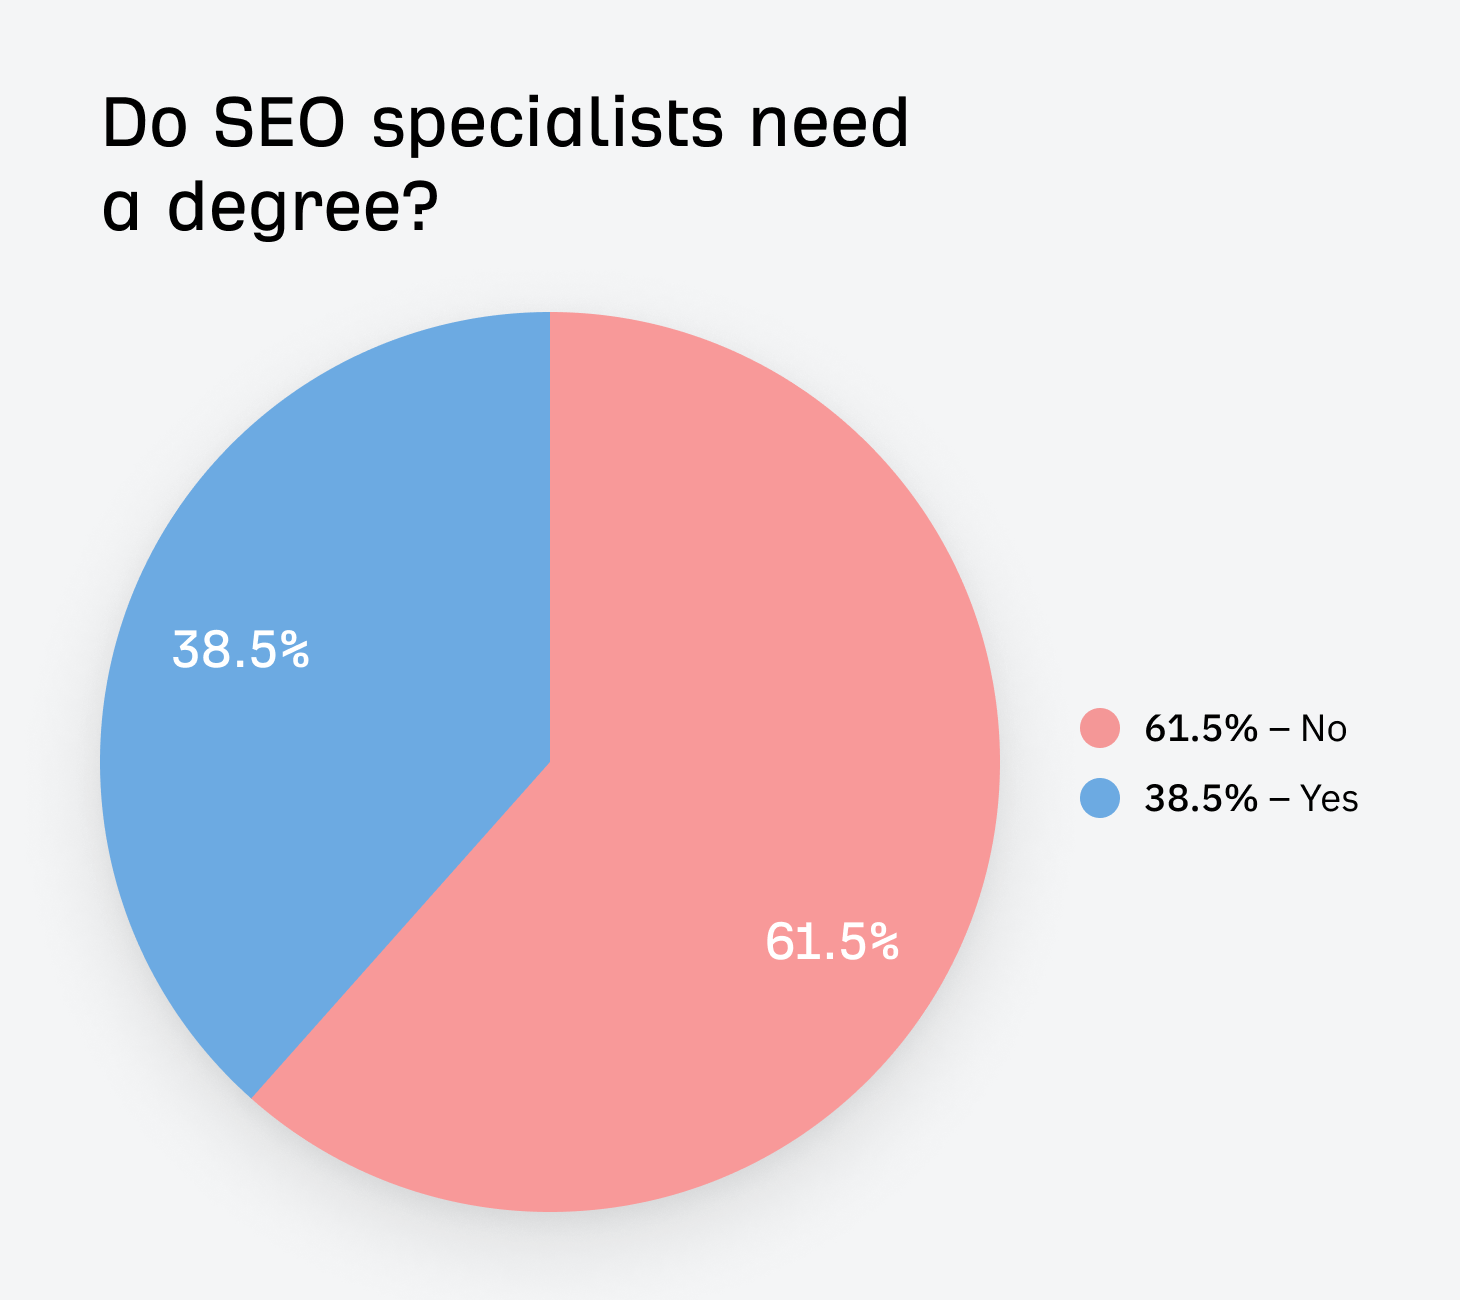 Chart showing whether SEO specialists need a degree